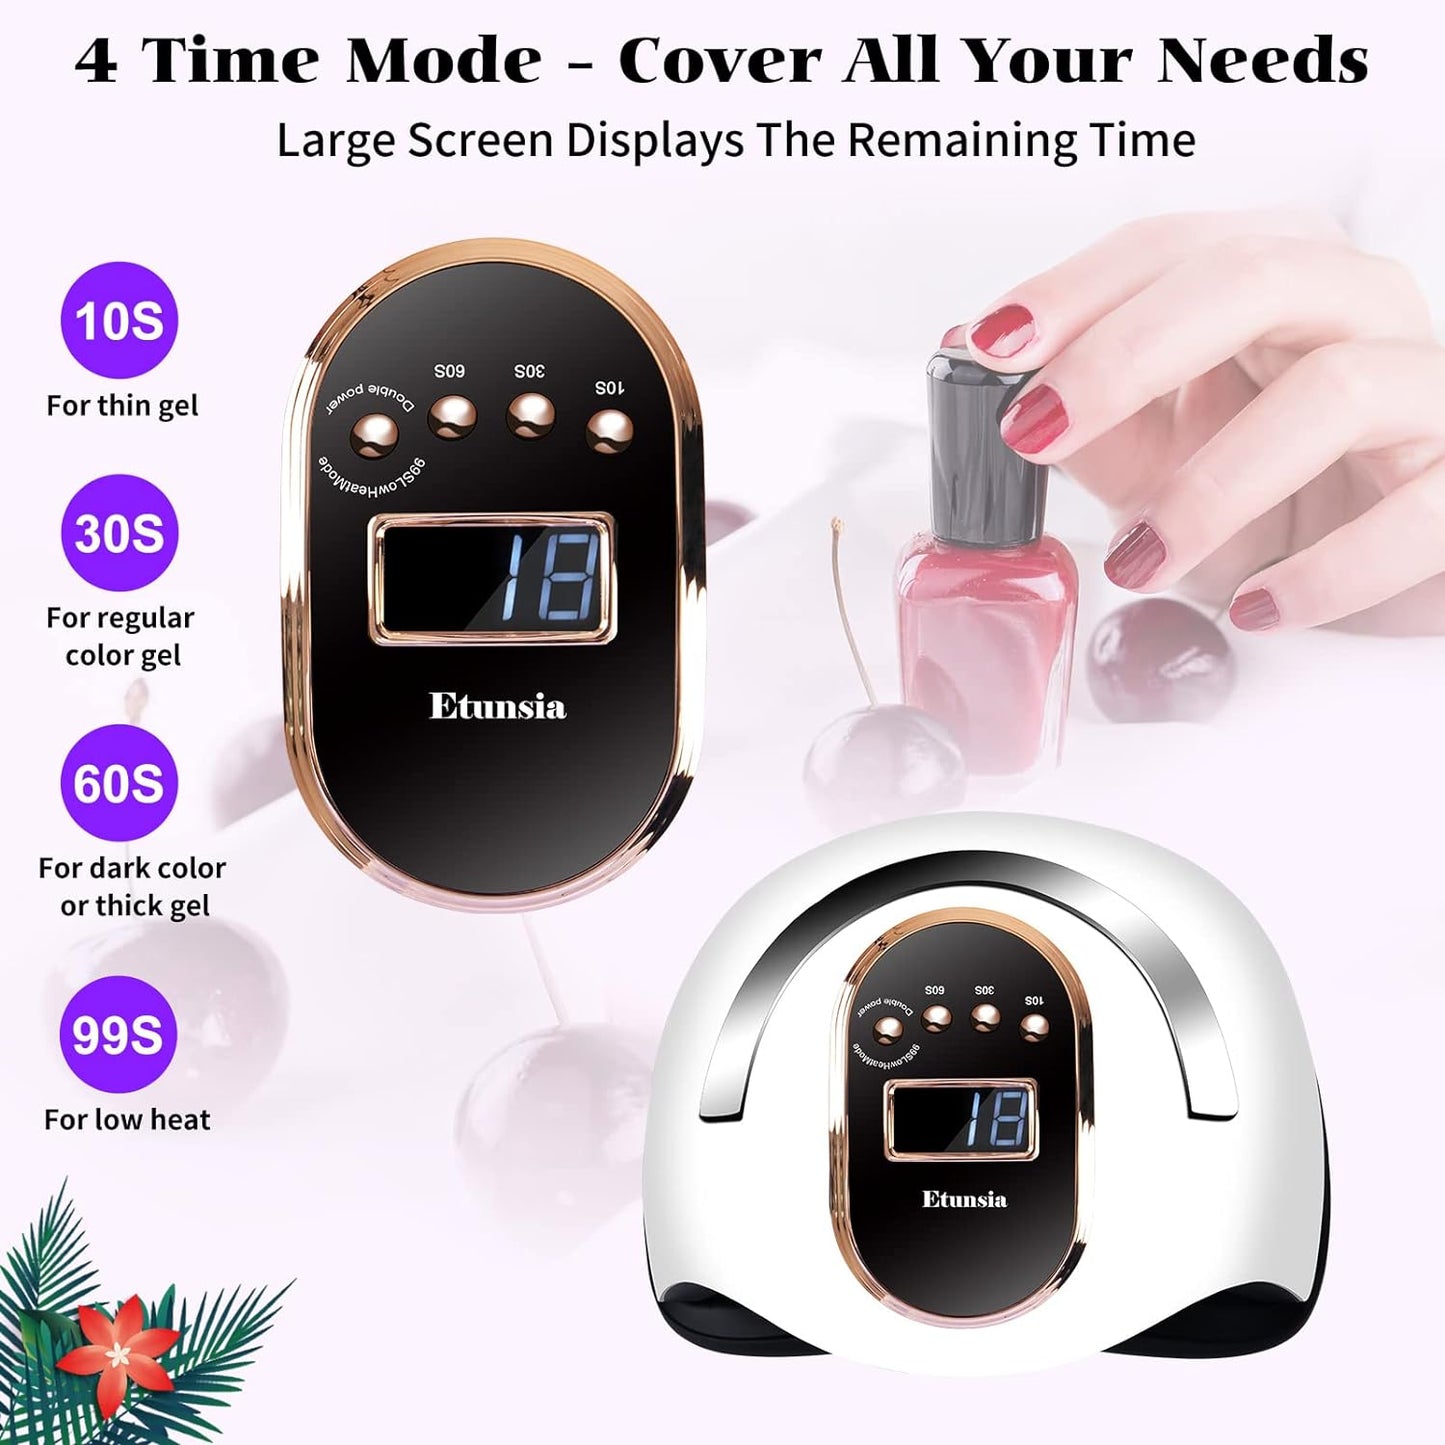 UV Light for Nails, 168W UV Light for Gel Nails/Acrylic, UV LED Nail Lamp with 4 Timer Modes - Automatic Sensor -LCD Screen - 2 UV Gloves UPF50+, Gel Nail Light for Salon Quality at Home